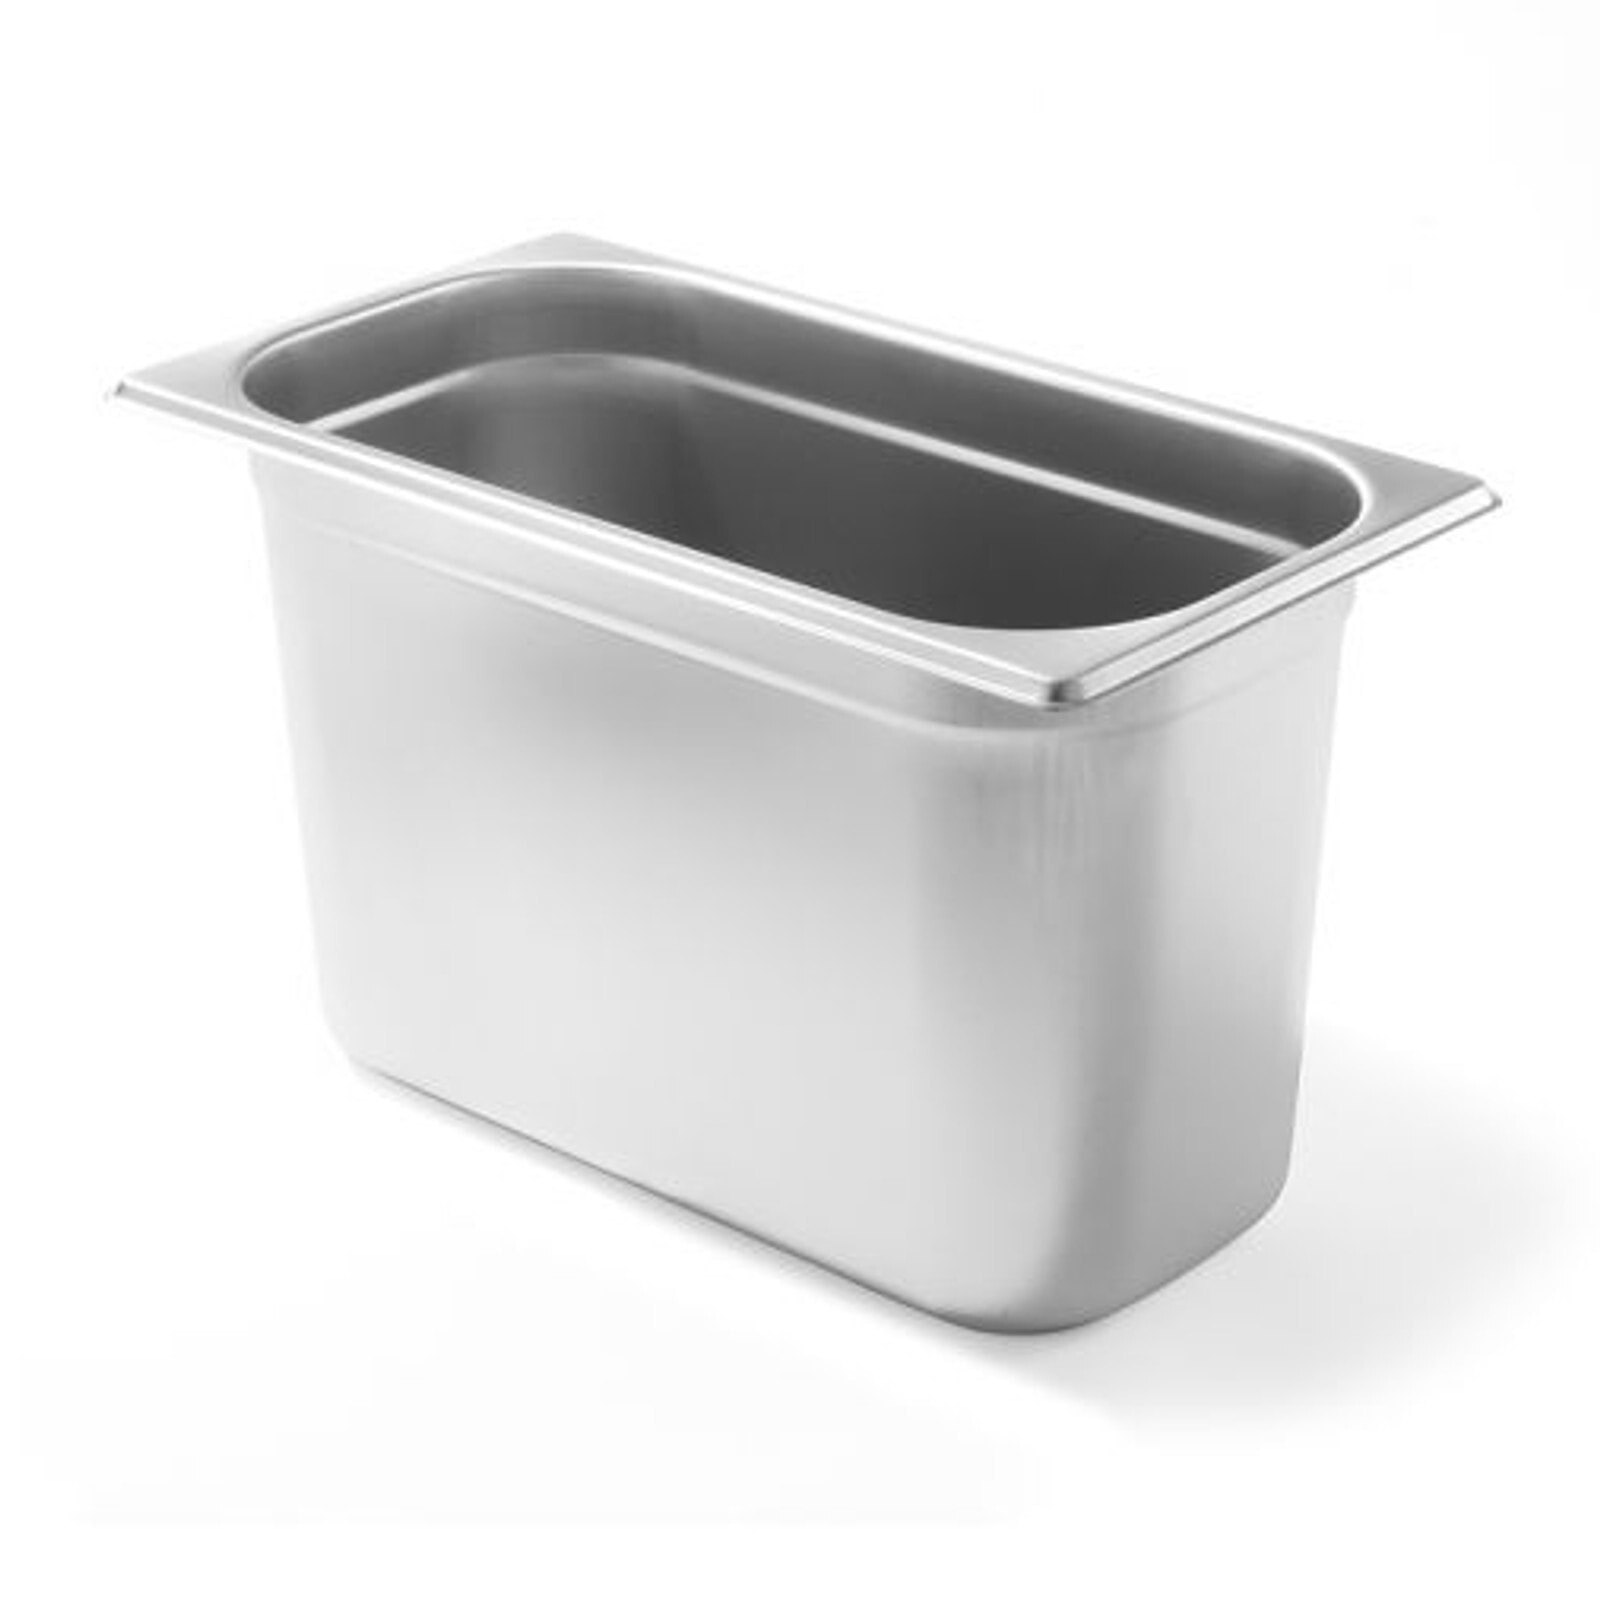 GN container 1/4 height 200 mm, stainless steel - Hendi 800553